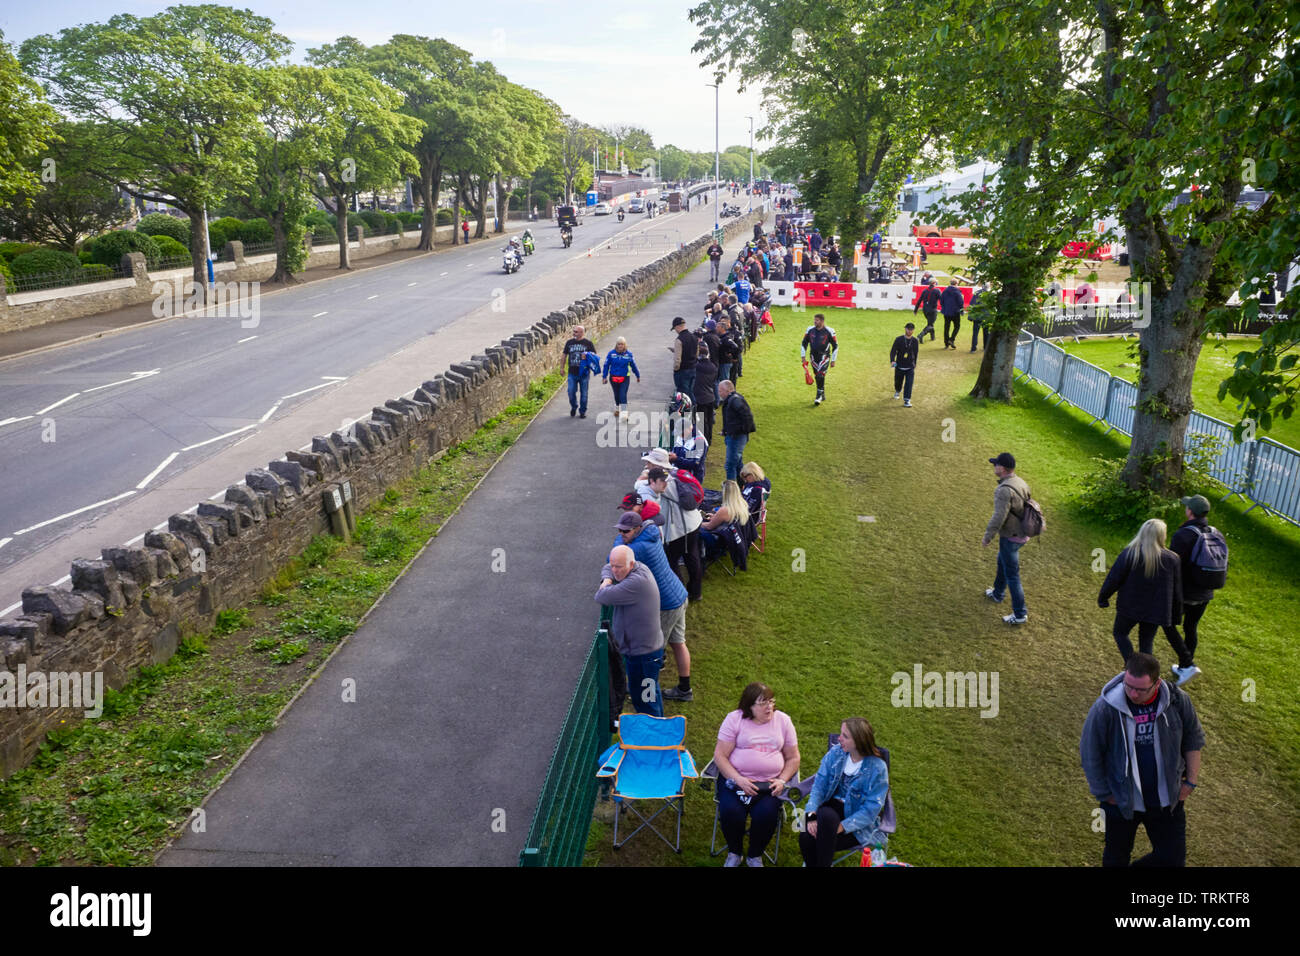 Local people gather to watch the Senior TT race near the grandstand, Douglas, Isle of Man Stock Photo